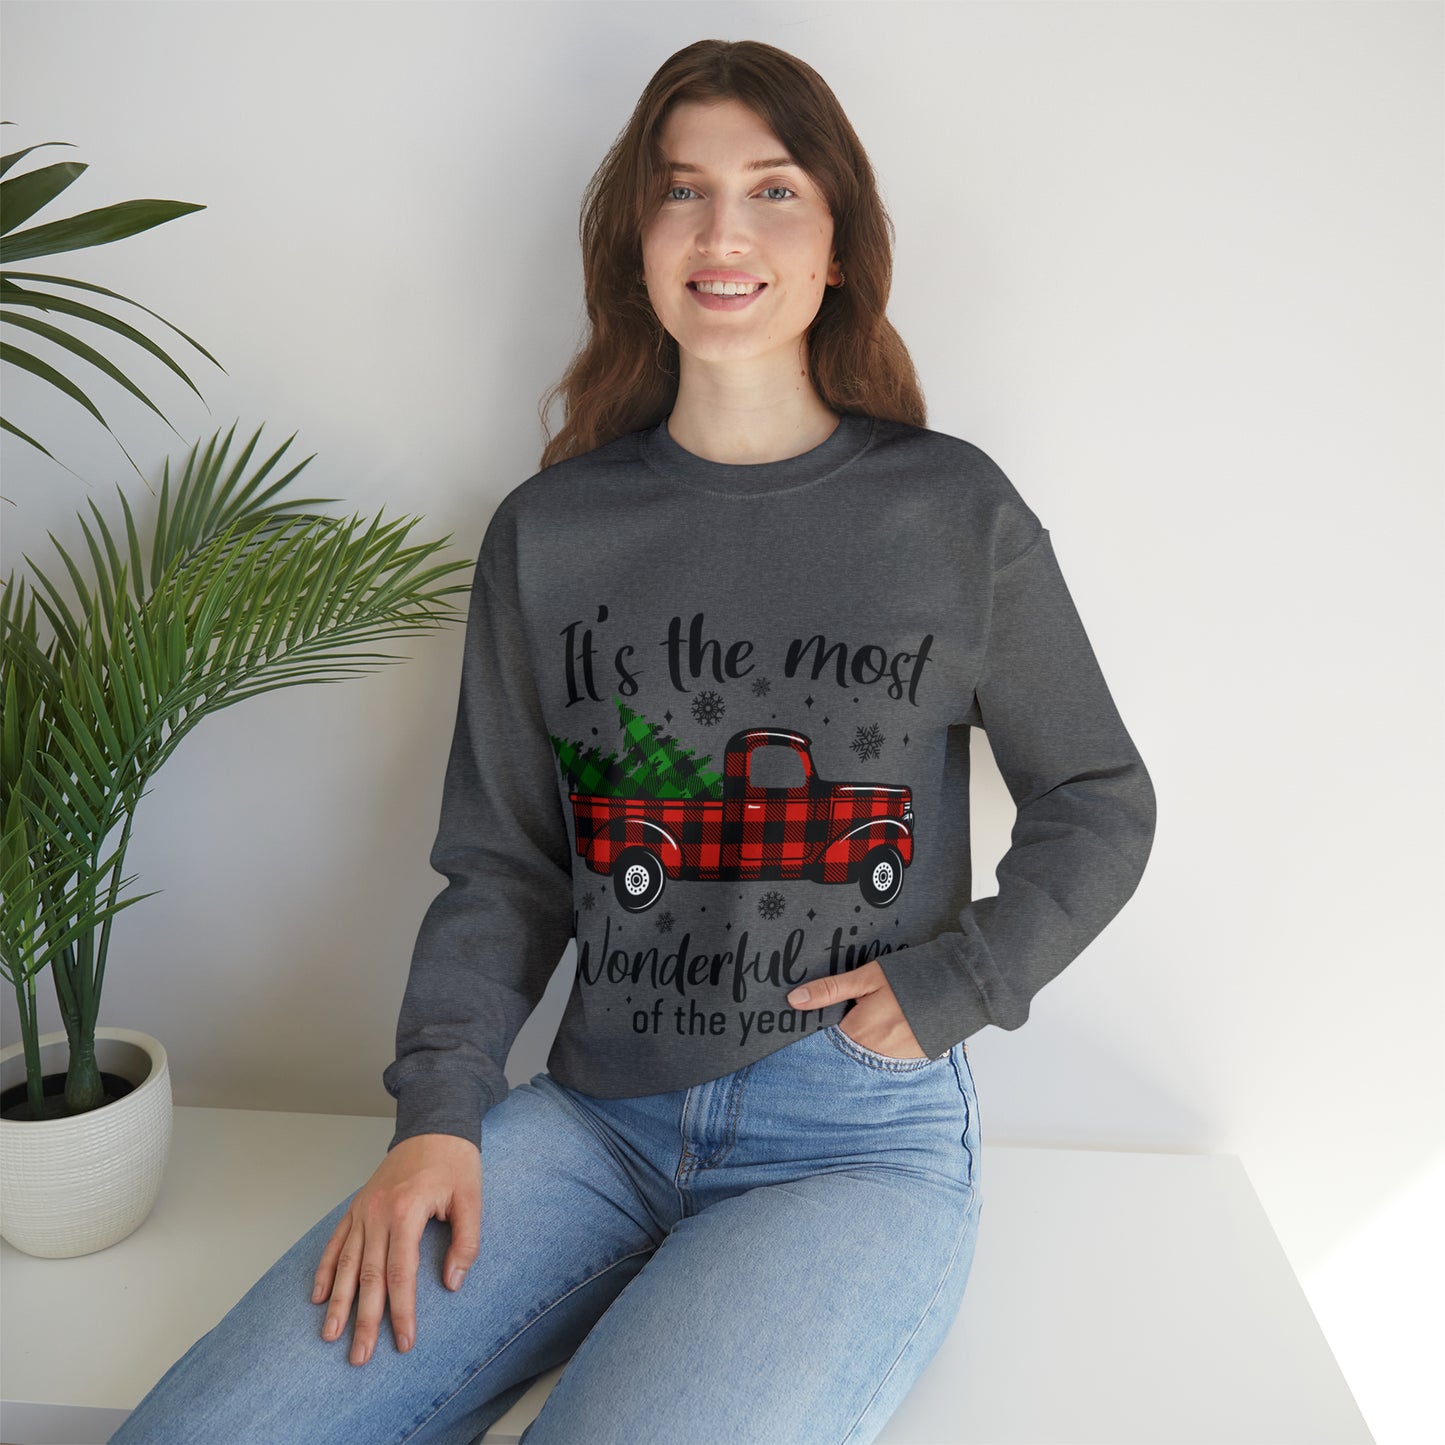 It's The Most Wonderful Time of the Year Christmas Truck Crewneck Sweatshirt - Prominent StylS of Sorts- PSS!